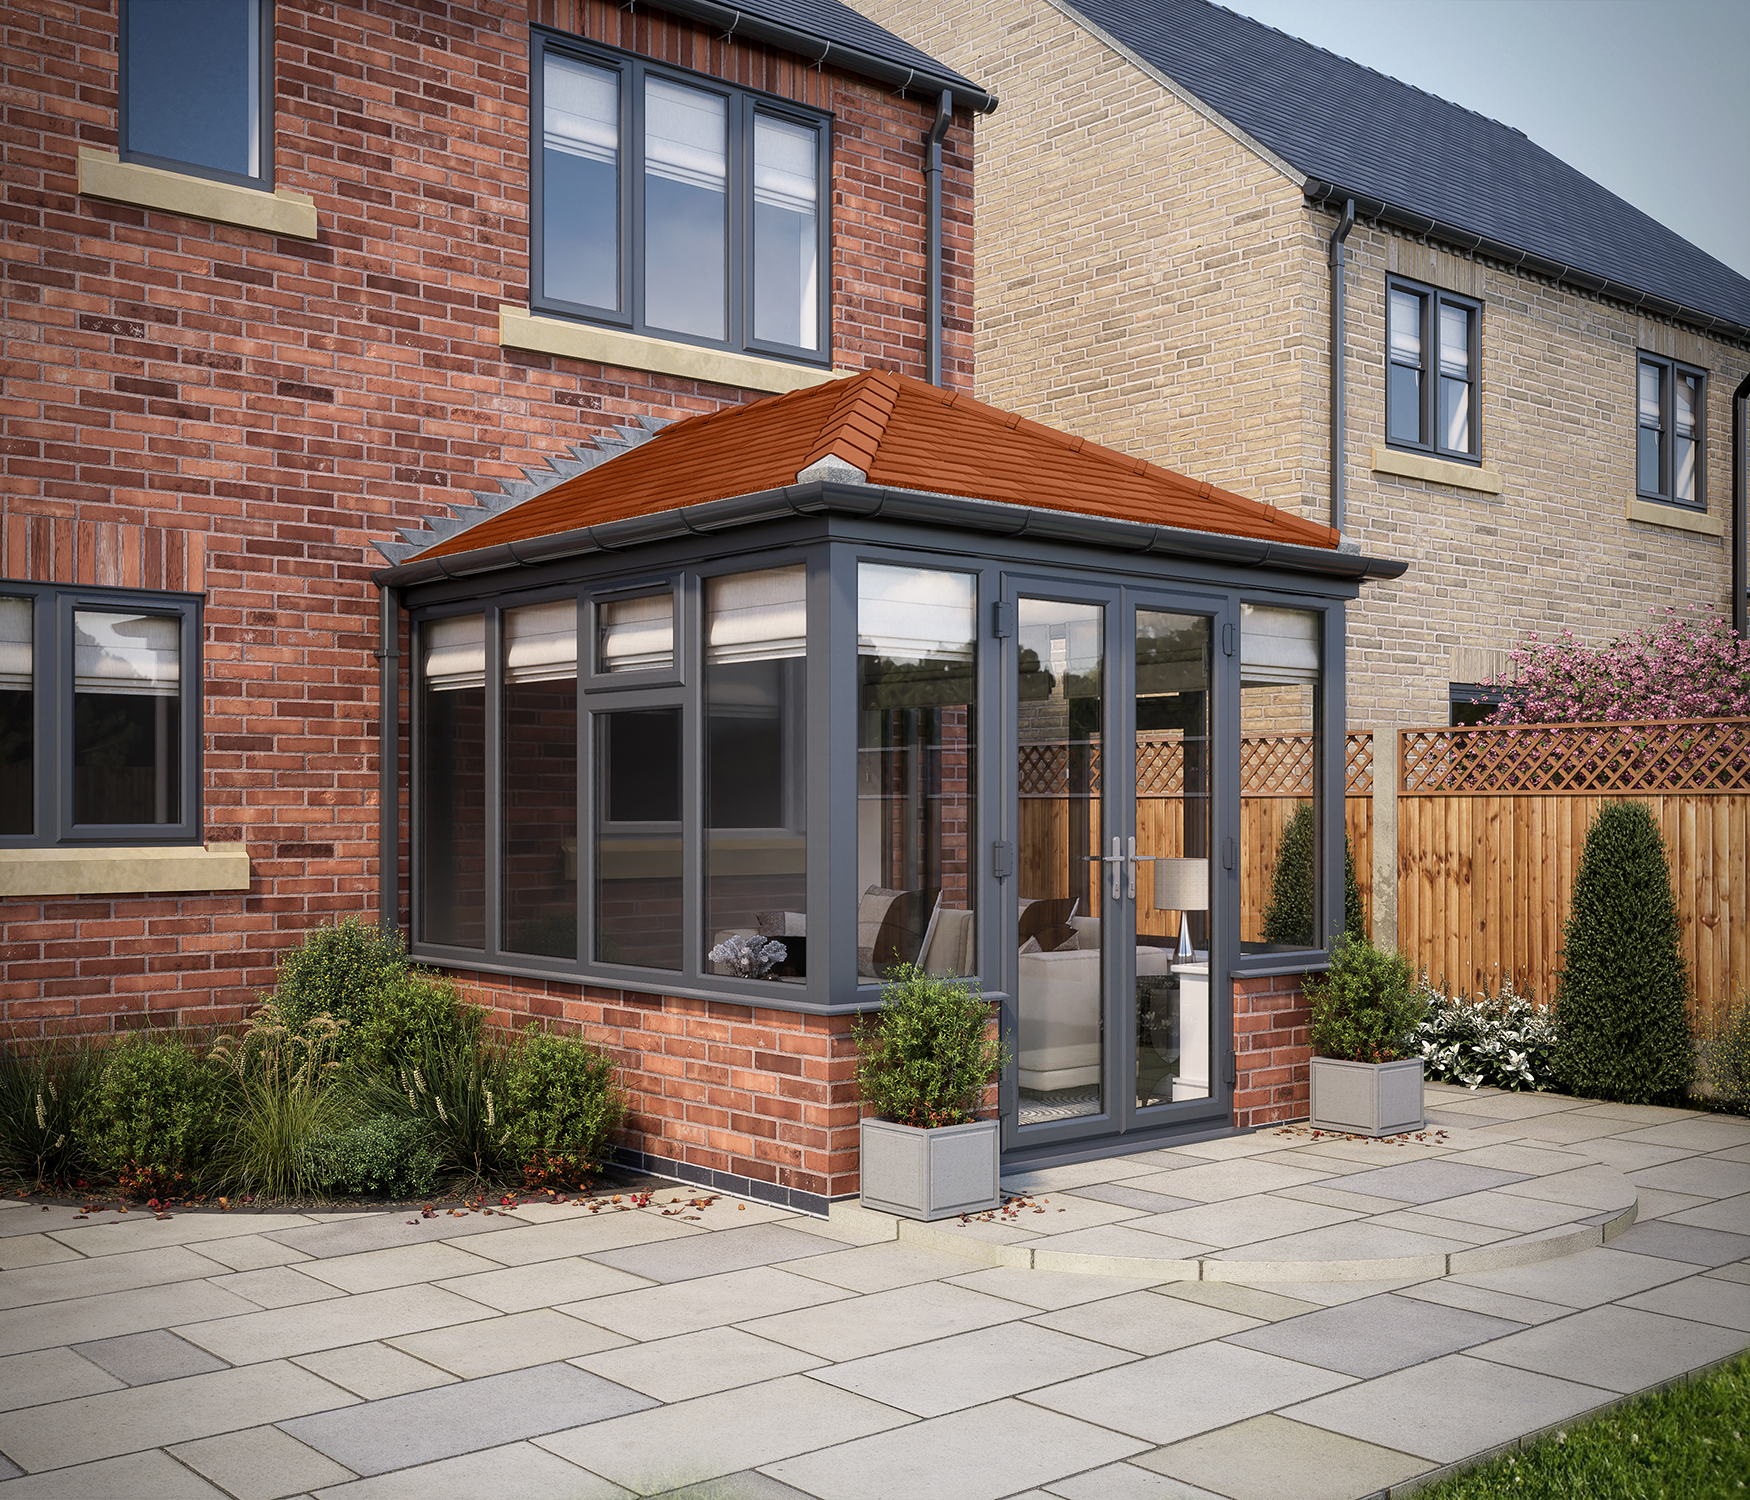 SOLid Roof Edwardian Conservatory Grey Frames Dwarf Wall with Rustic Terracotta Tiles - 10 x 10ft